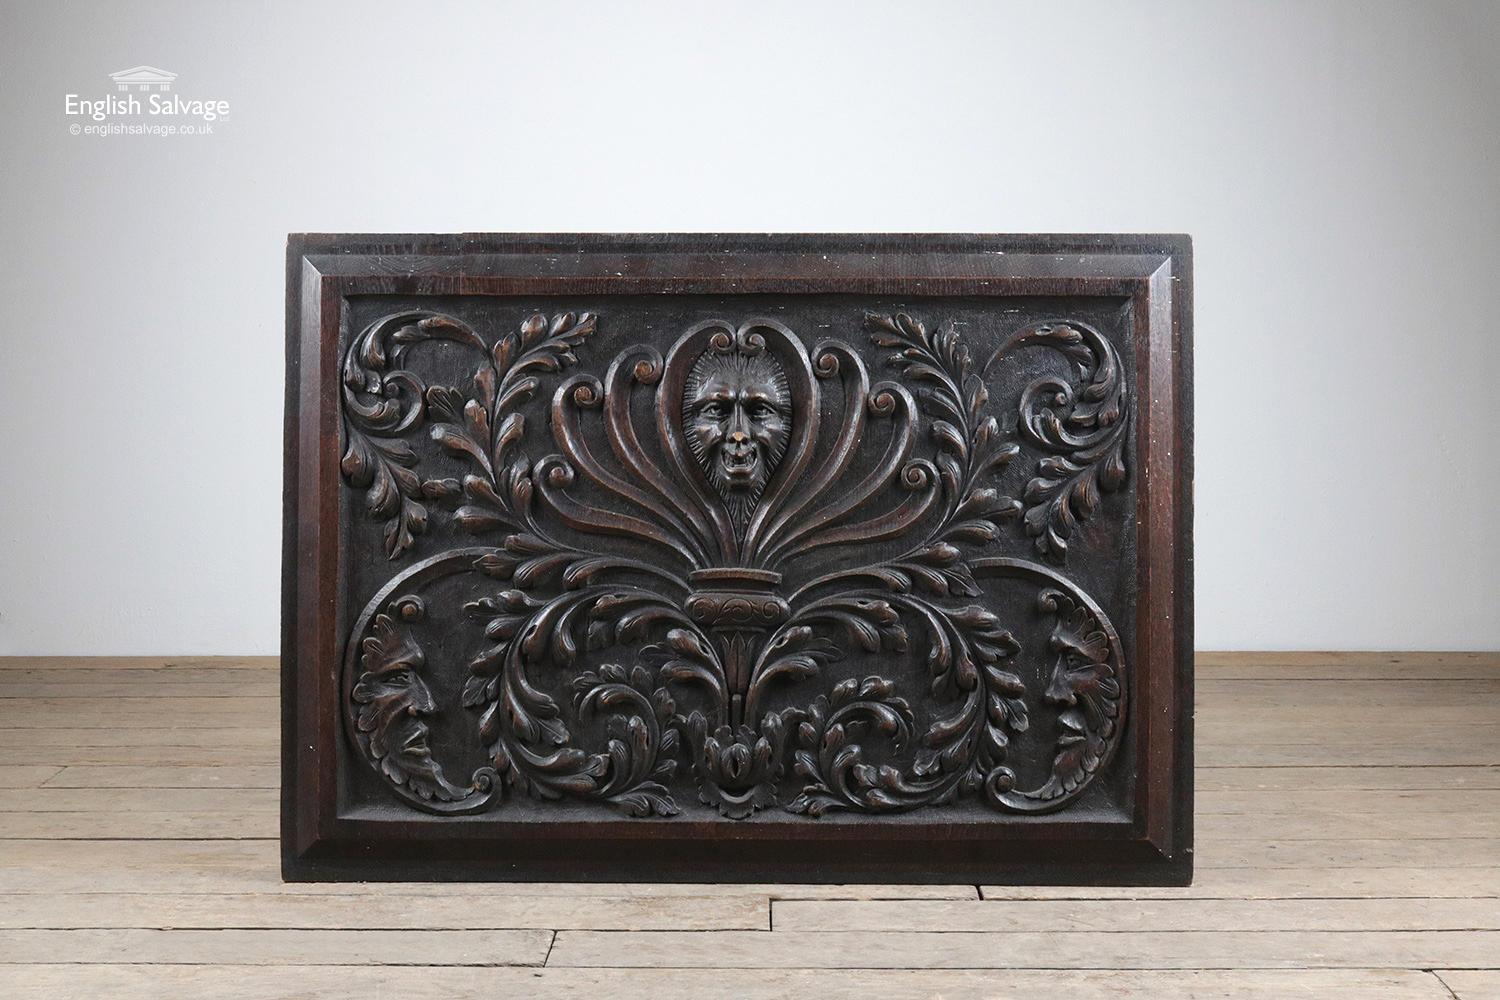 This salvaged oak panel is relief carved with ornate detailing of central mask positioned in an anthemion surrounded by foliate scrolls and two further masks in the bottom two corners of the rectangular panel. The panel has some minor scratches and